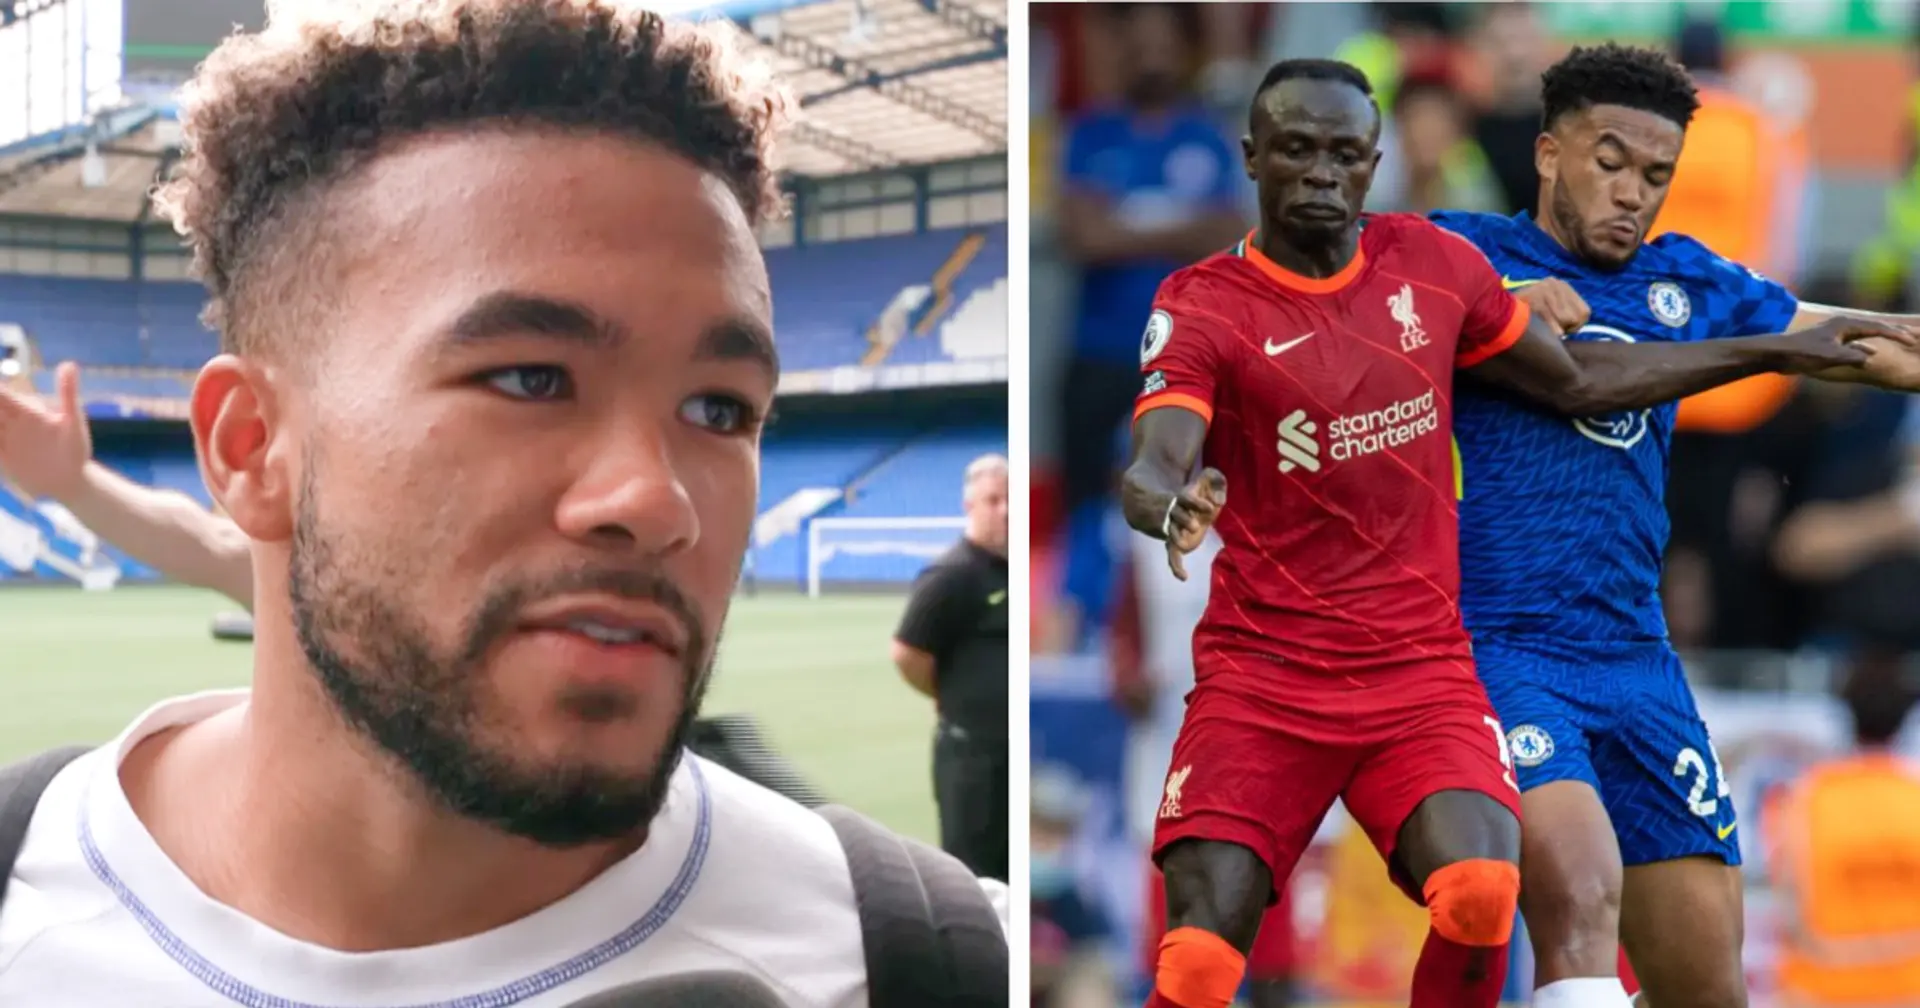 Chelsea's Reece James names 3 toughest players he's played against — includes Mane